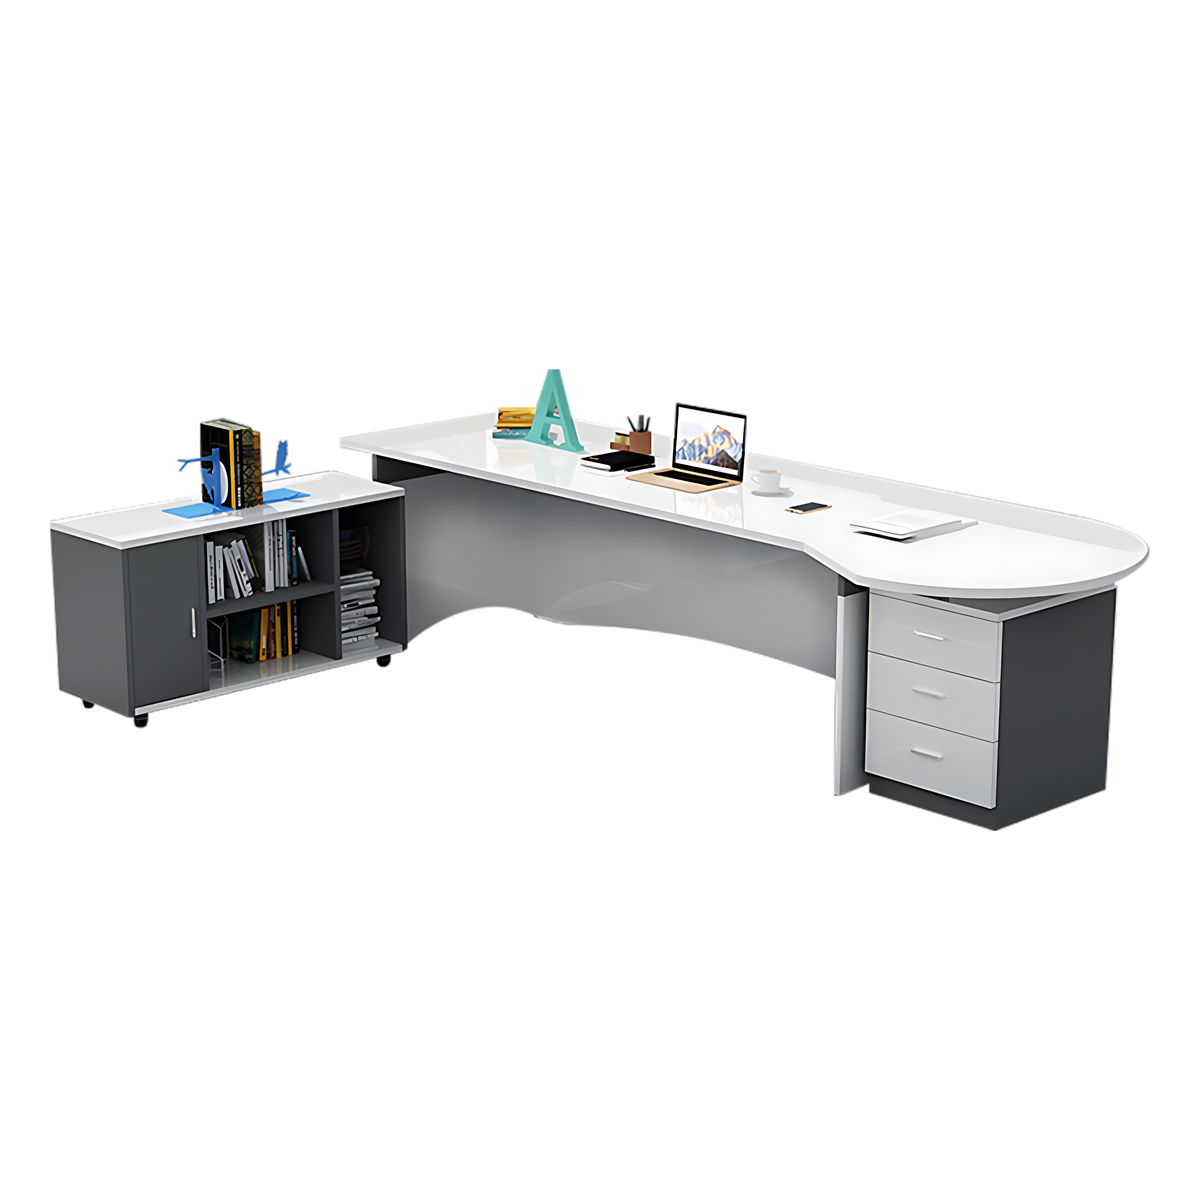 Executive desk with 3 Drawers and Rounded Corners Design